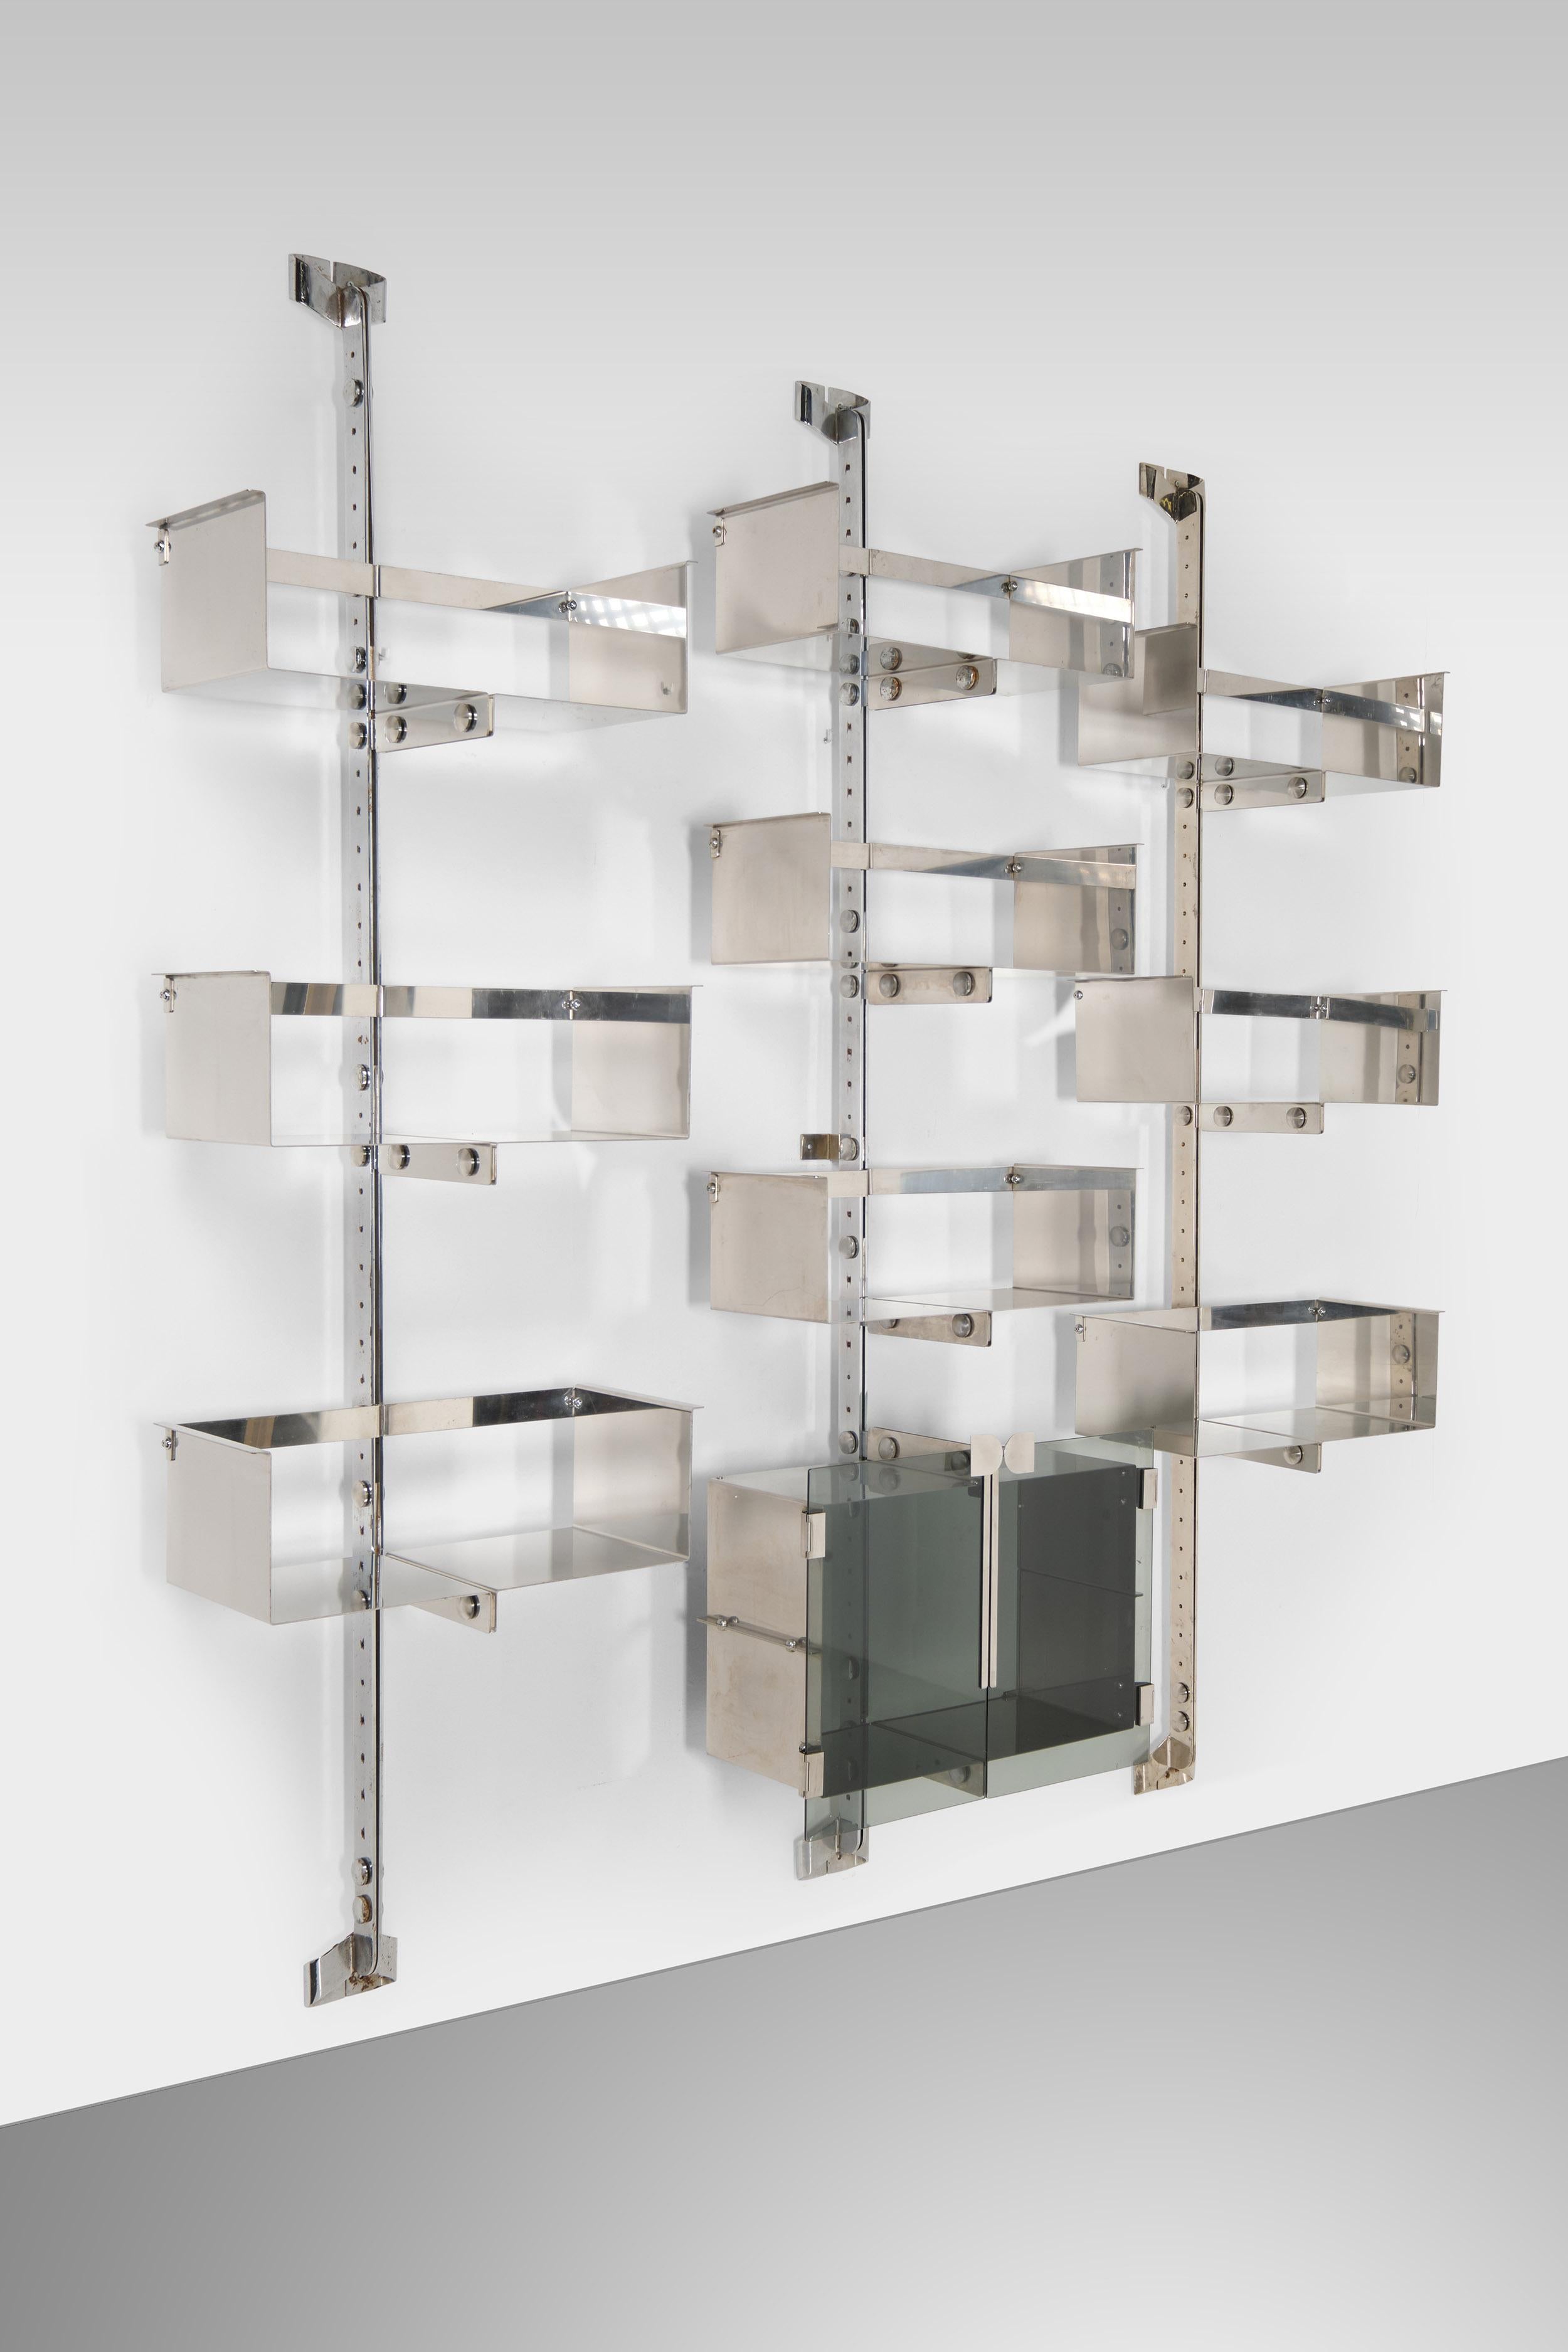 These three model P700 bookshelves were designed by Vittorio Introini for Saportiti's Proposal series. Lightness and elegance are the keywords for these amazing items, made out of chromed metal and mirrored steel. The glass shutters add an extra